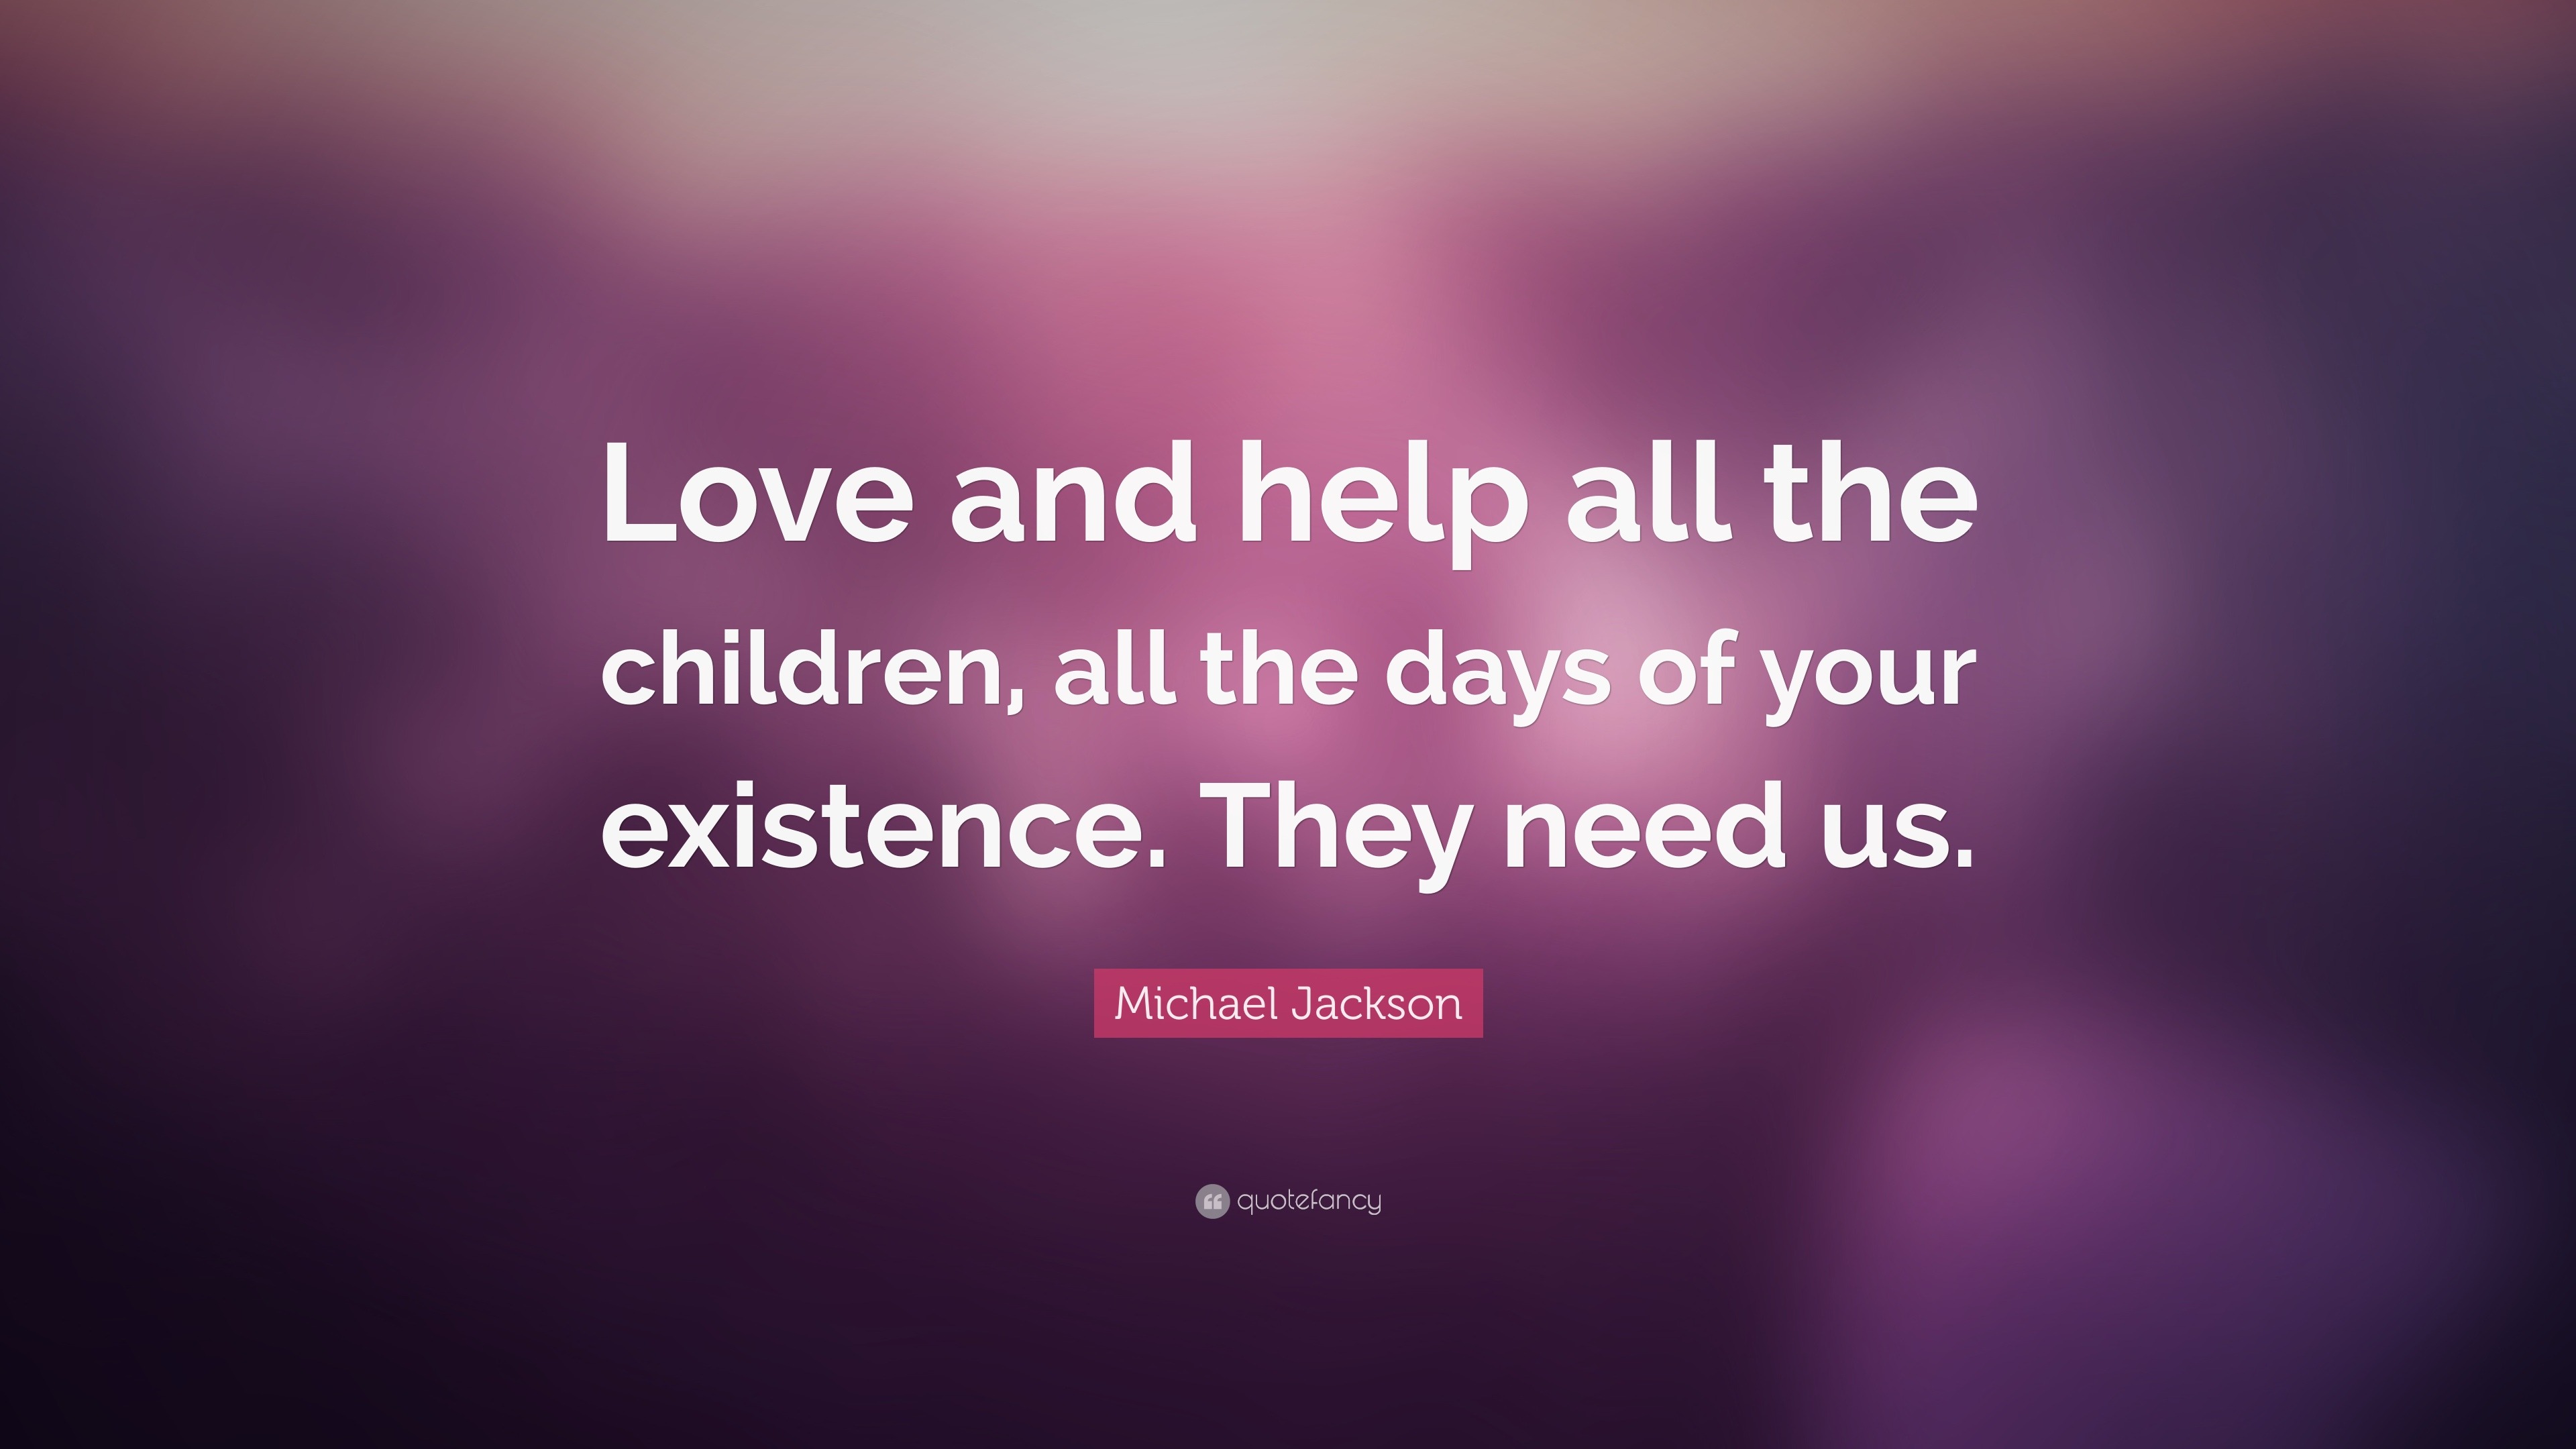 Michael Jackson Quote: "Love and help all the children, all the days of your existence. They ...